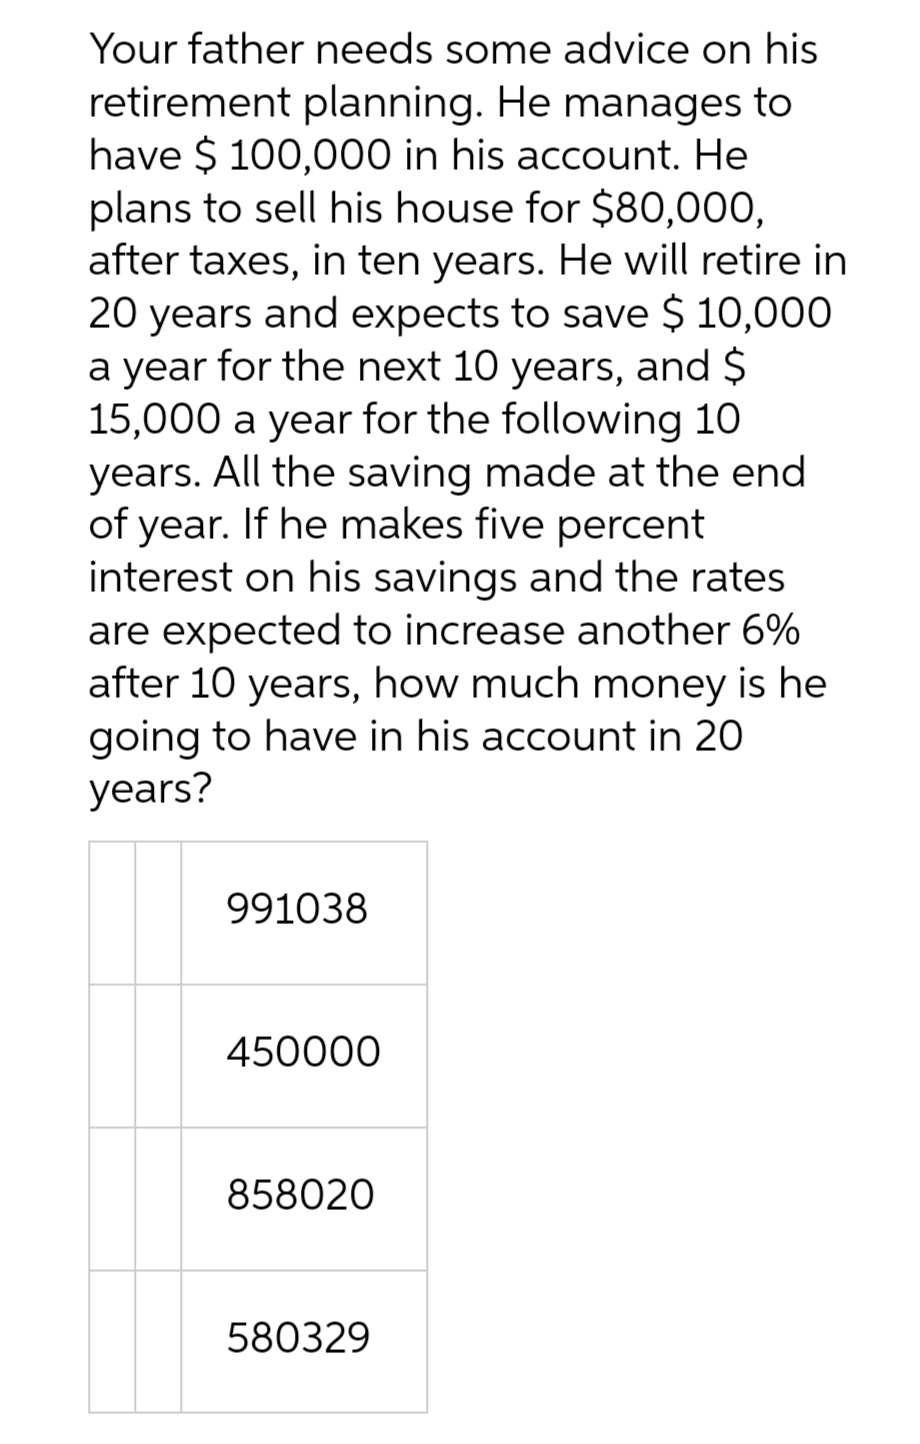 Your father needs some advice on his
retirement planning. He manages to
have $100,000 in his account. He
plans to sell his house for $80,000,
after taxes, in ten years. He will retire in
20 years and expects to save $10,000
a year for the next 10 years, and $
15,000 a year for the following 10
years. All the saving made at the end
of year. If he makes five percent
interest on his savings and the rates
are expected to increase another 6%
after 10 years, how much money is he
going to have in his account in 20
years?
991038
450000
858020
580329